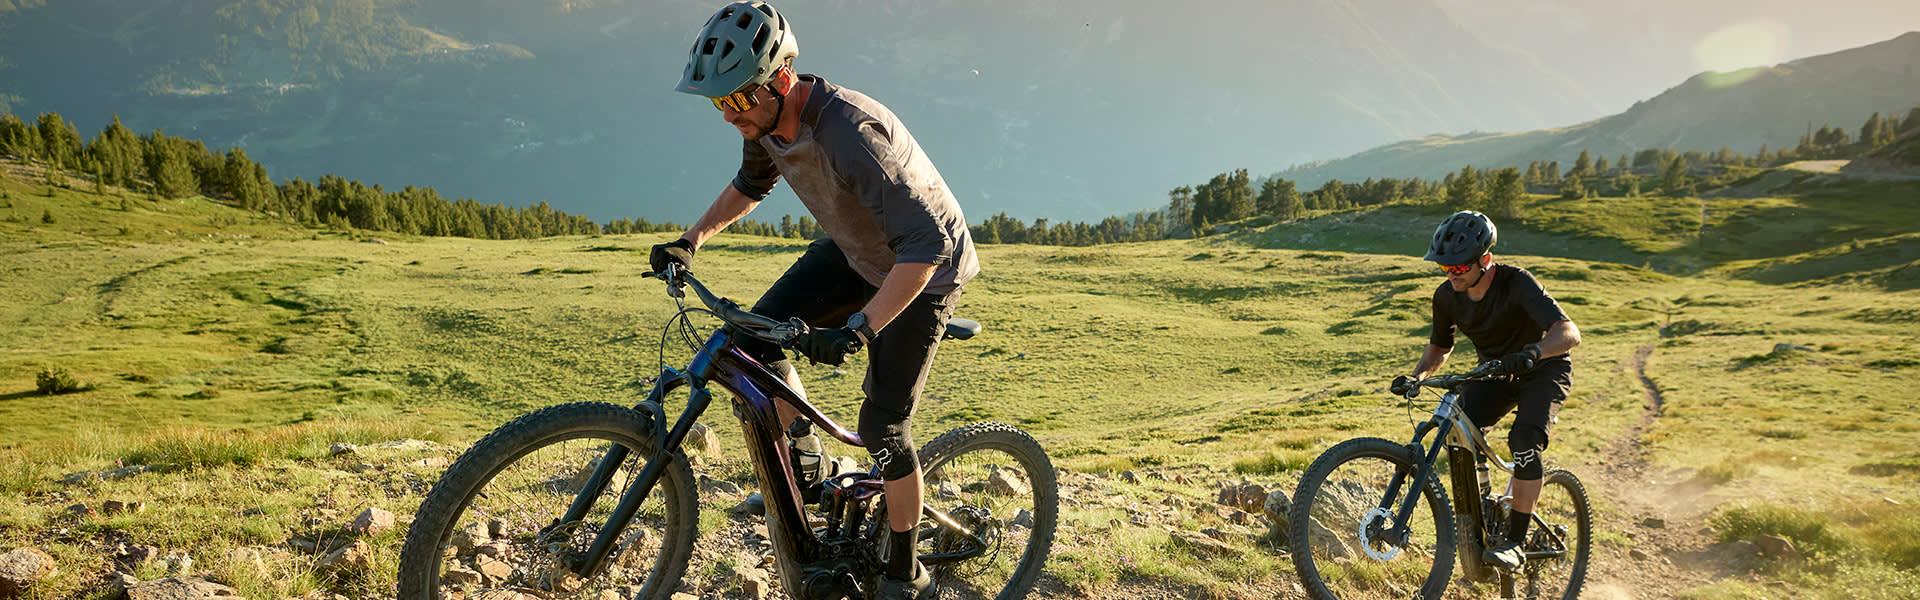 Shop the best Giant mountain bikes, e-bikes and more